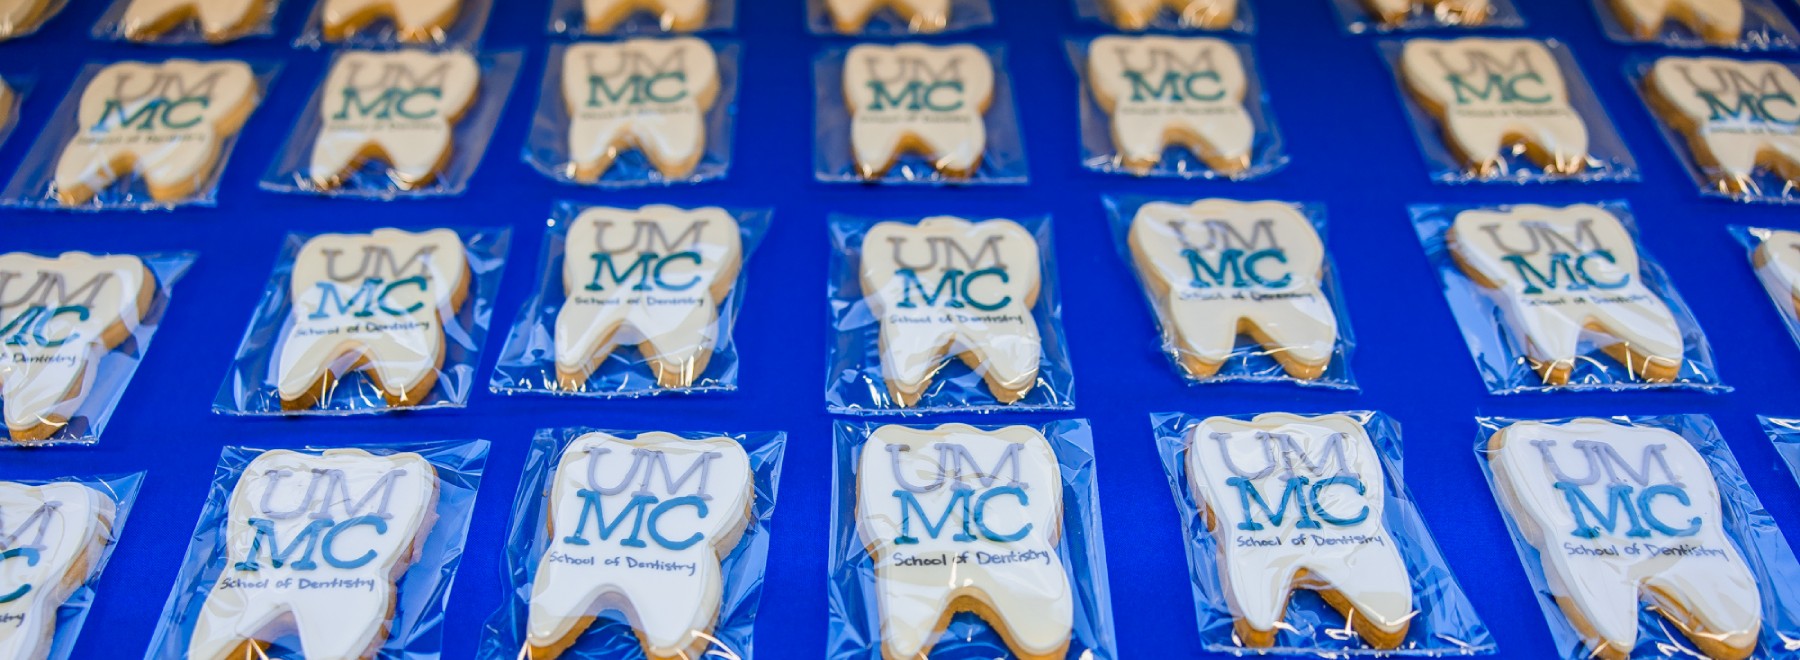 School of Dentistry student Lauren Thames baked and decorated 250 tooth-shaped cookies to give out to UMMC faculty and staff arriving at work the morning at August 24. Lindsay McMurtray/UMMC Communications